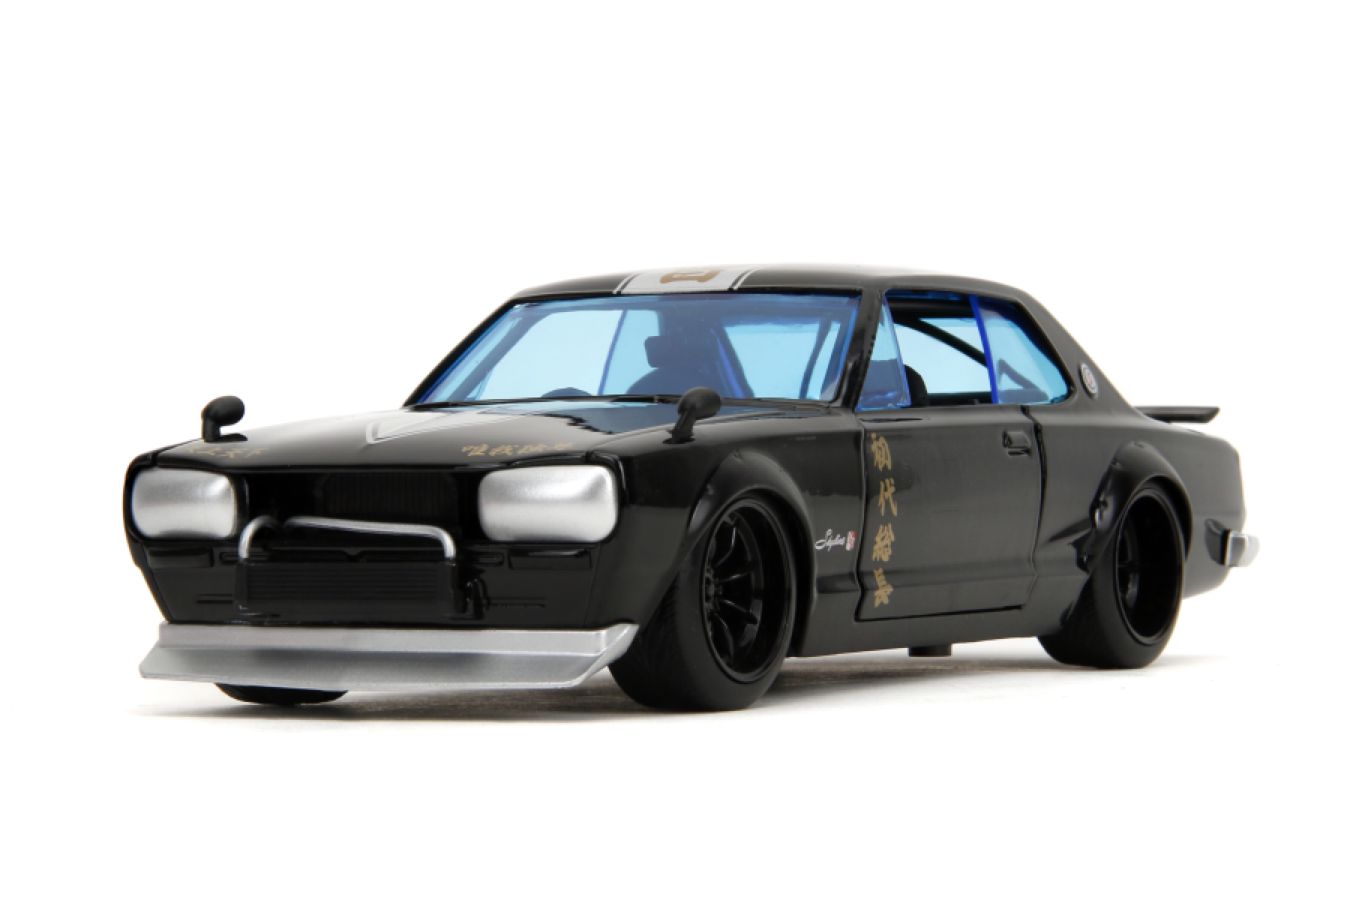 Tokyo Revengers - 1971 Nissan Skyline GTR with Mikey 1:24 Scale Diecast Vehicle